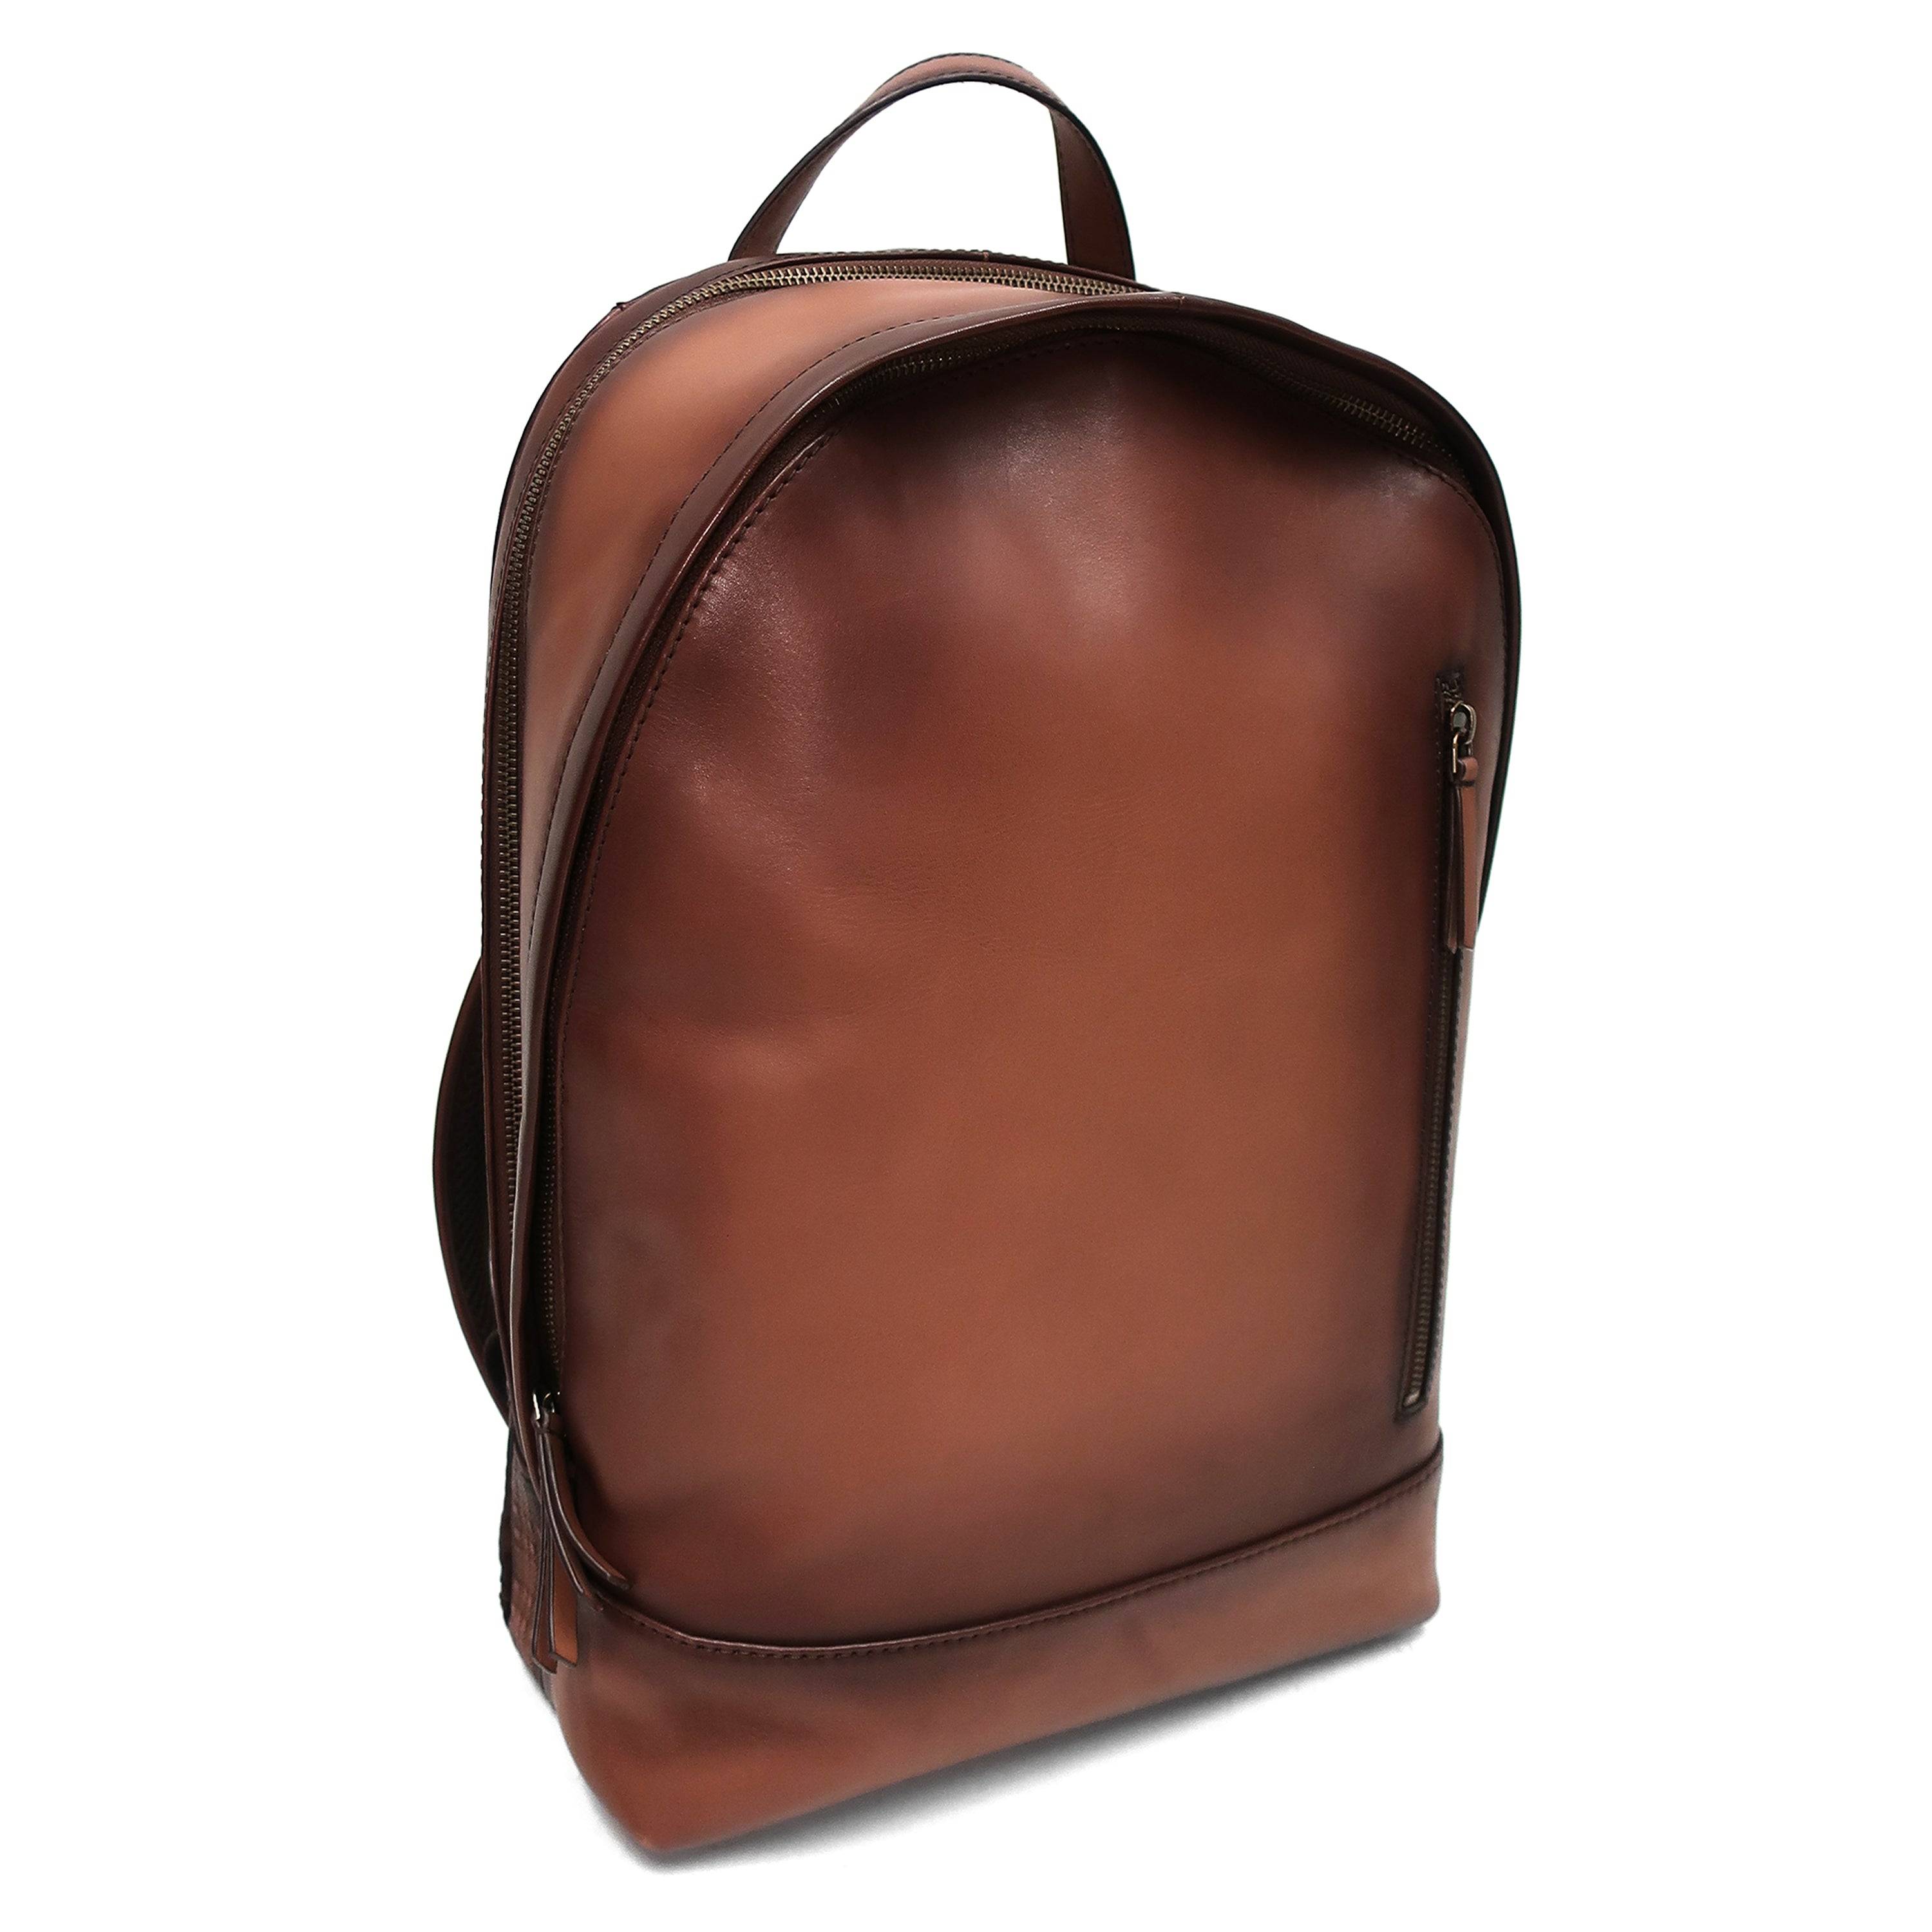 Dawn Hand-burnished leather backpack